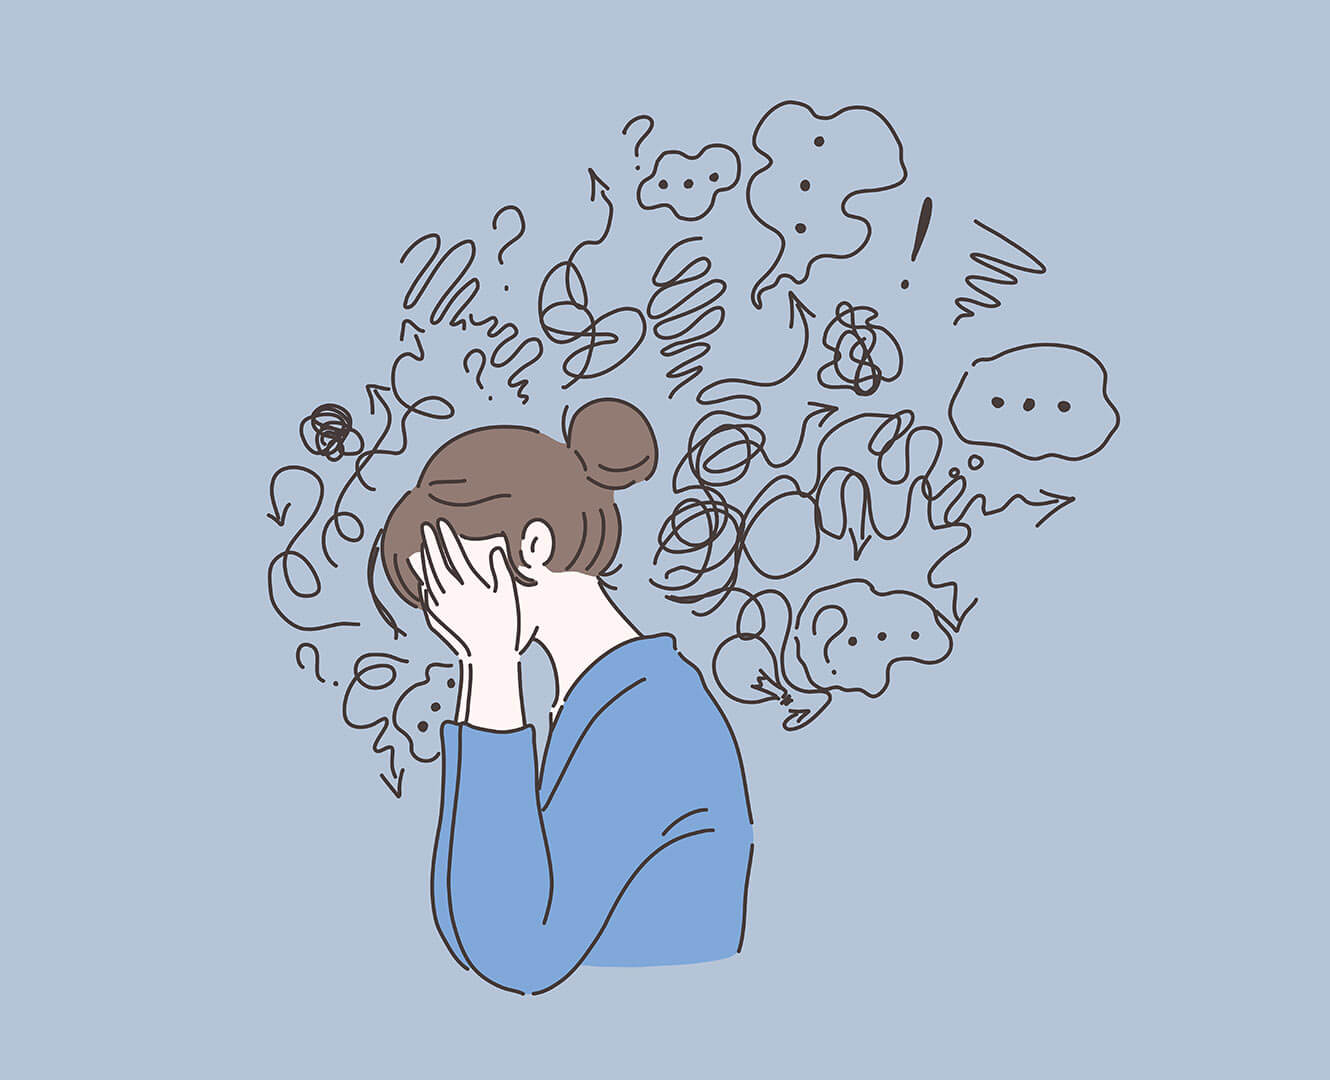 Graphic of woman with head in her hands and chaotic thoughts